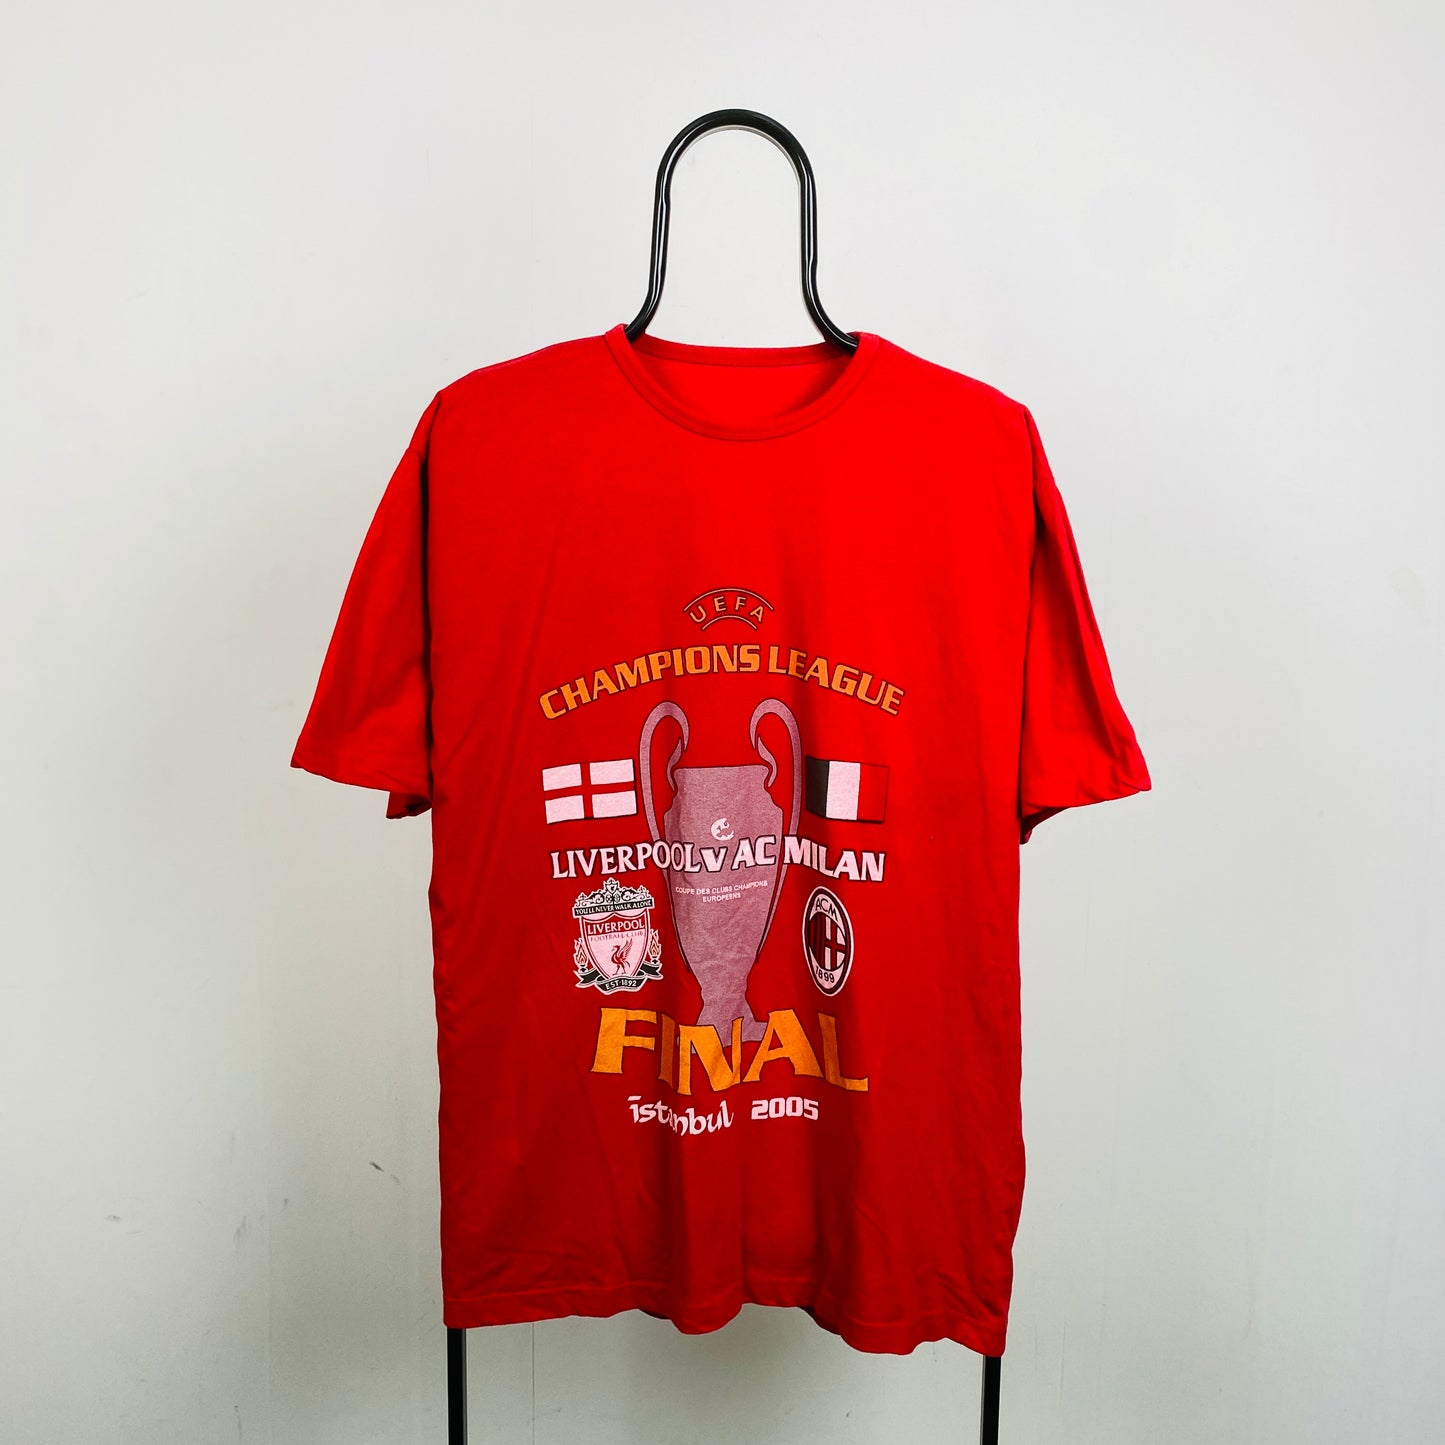 Retro 90s Liverpool Champions League T-Shirt Red XL